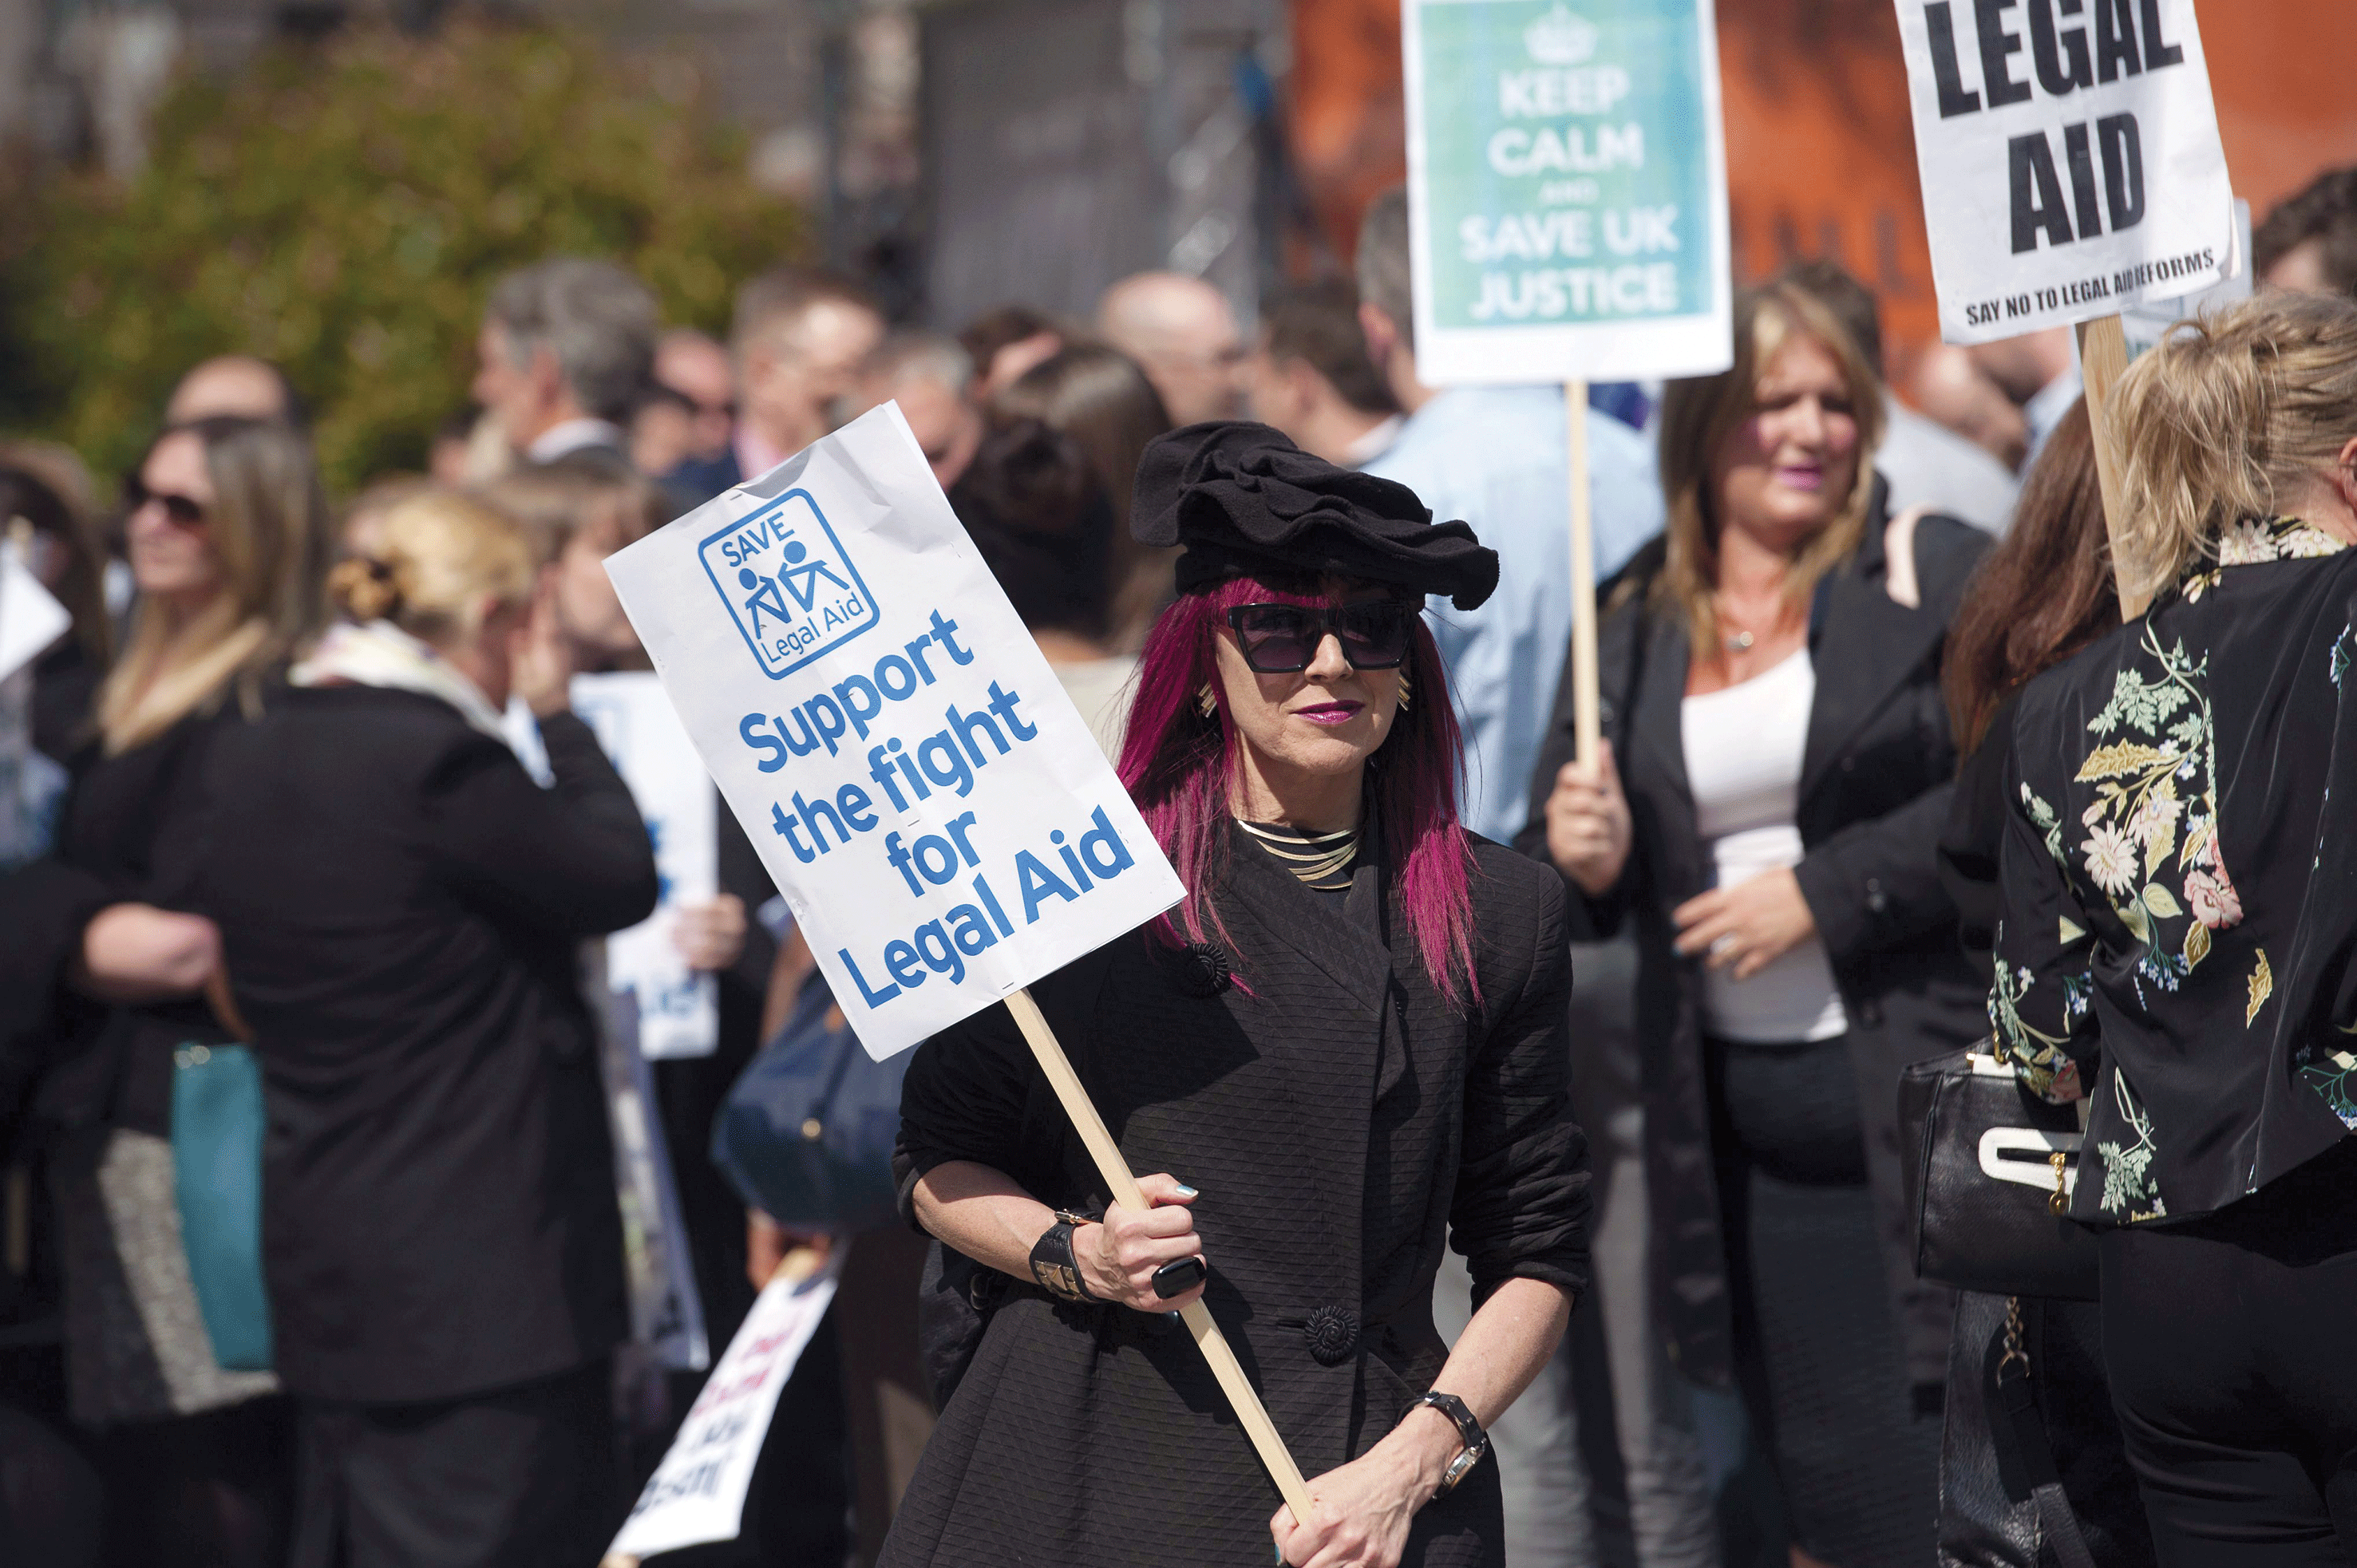 Legal aid protest Manchester